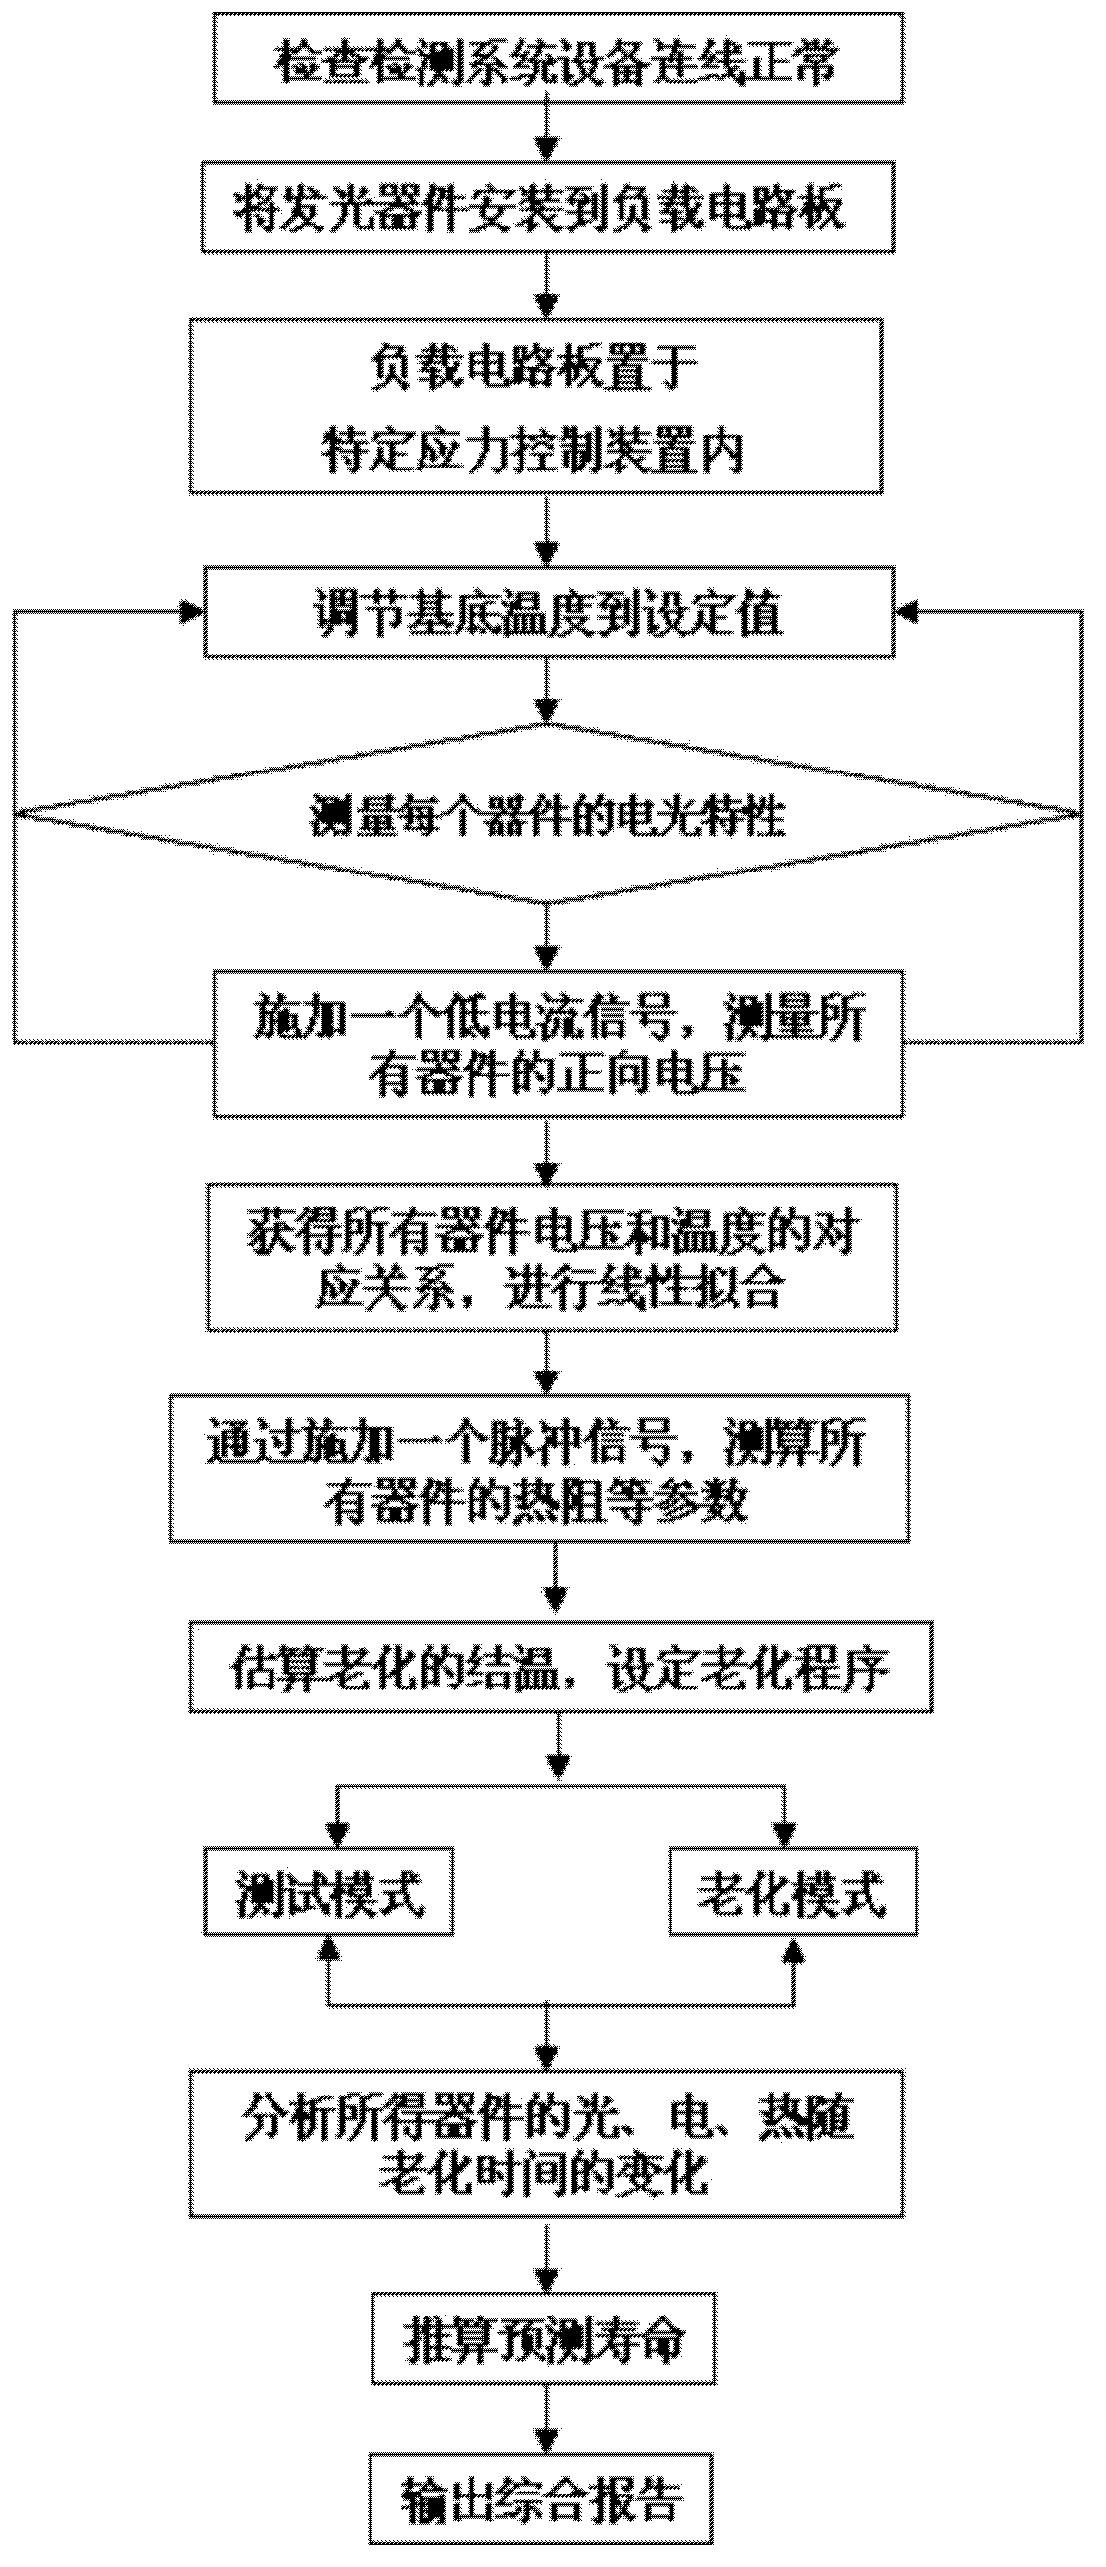 Semiconductor luminescent device or module online multifunctional test system and method